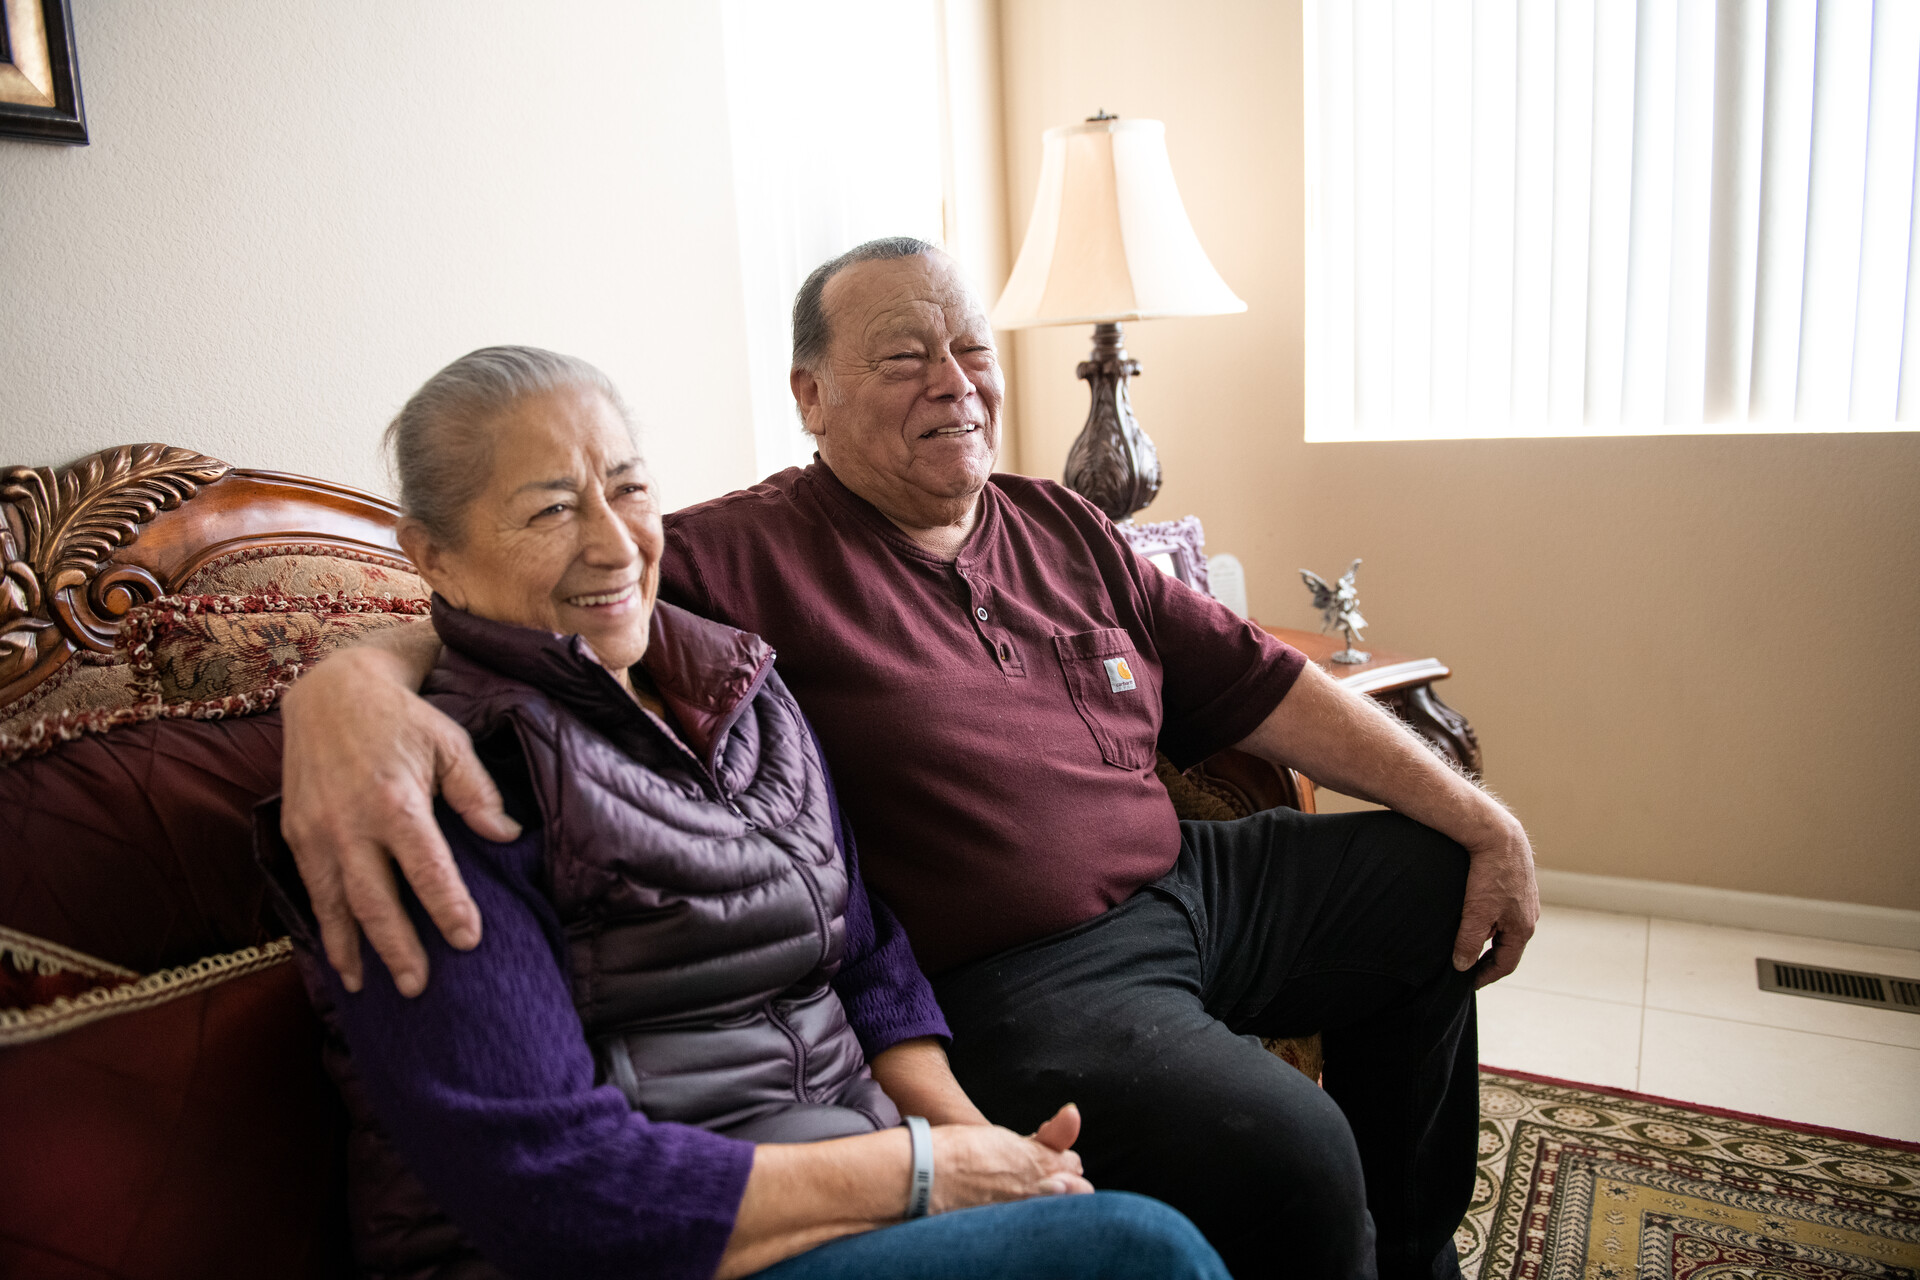 An older Latino couple sits on a couch laughing. The man has his arm around his wife.